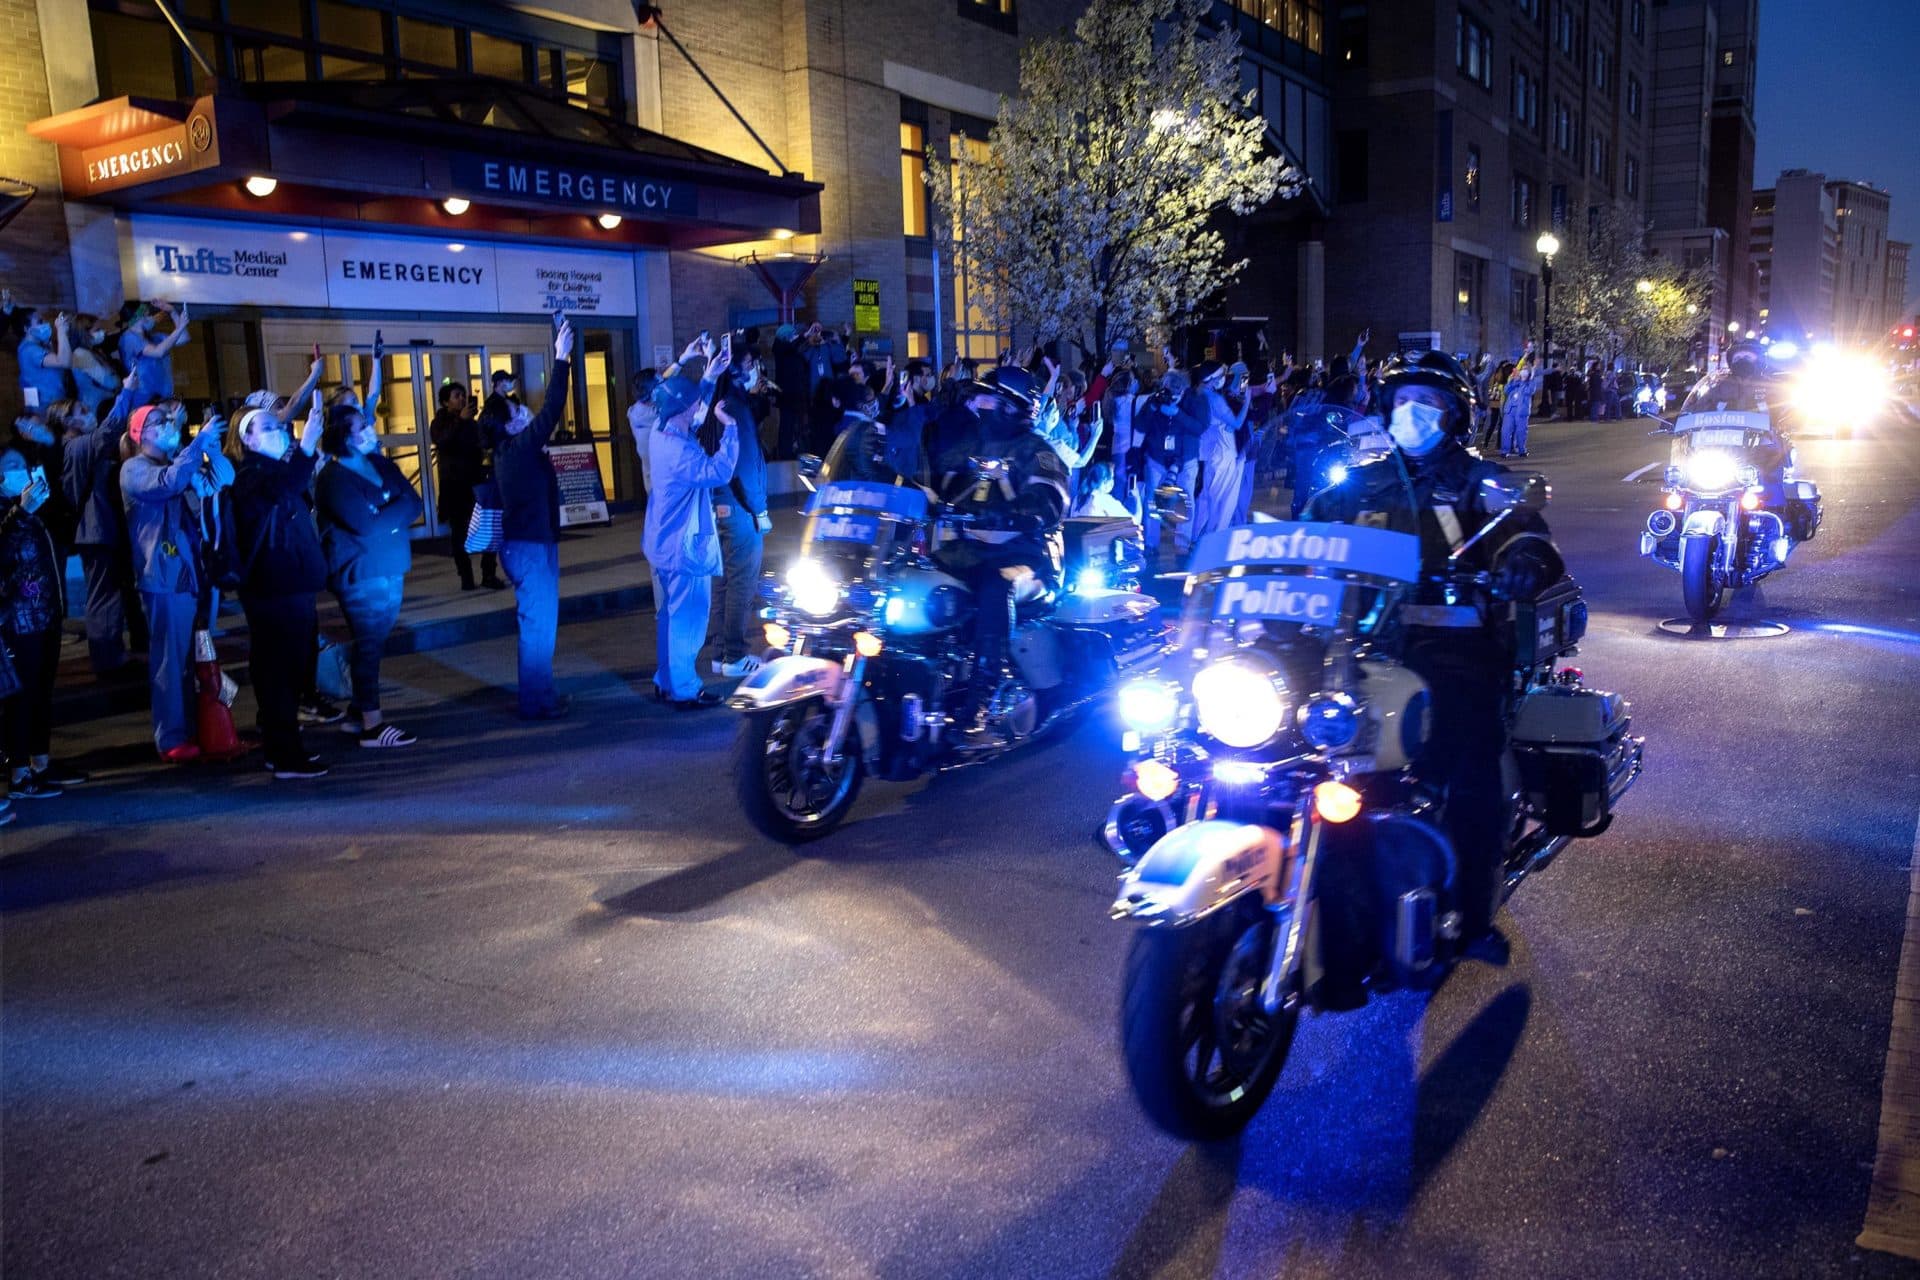 Police motorcyclists led a cavalcade of emergency vehicles on a tour of Boston hospitals to show support for healthcare workers. (Robin Lubbock/WBUR)